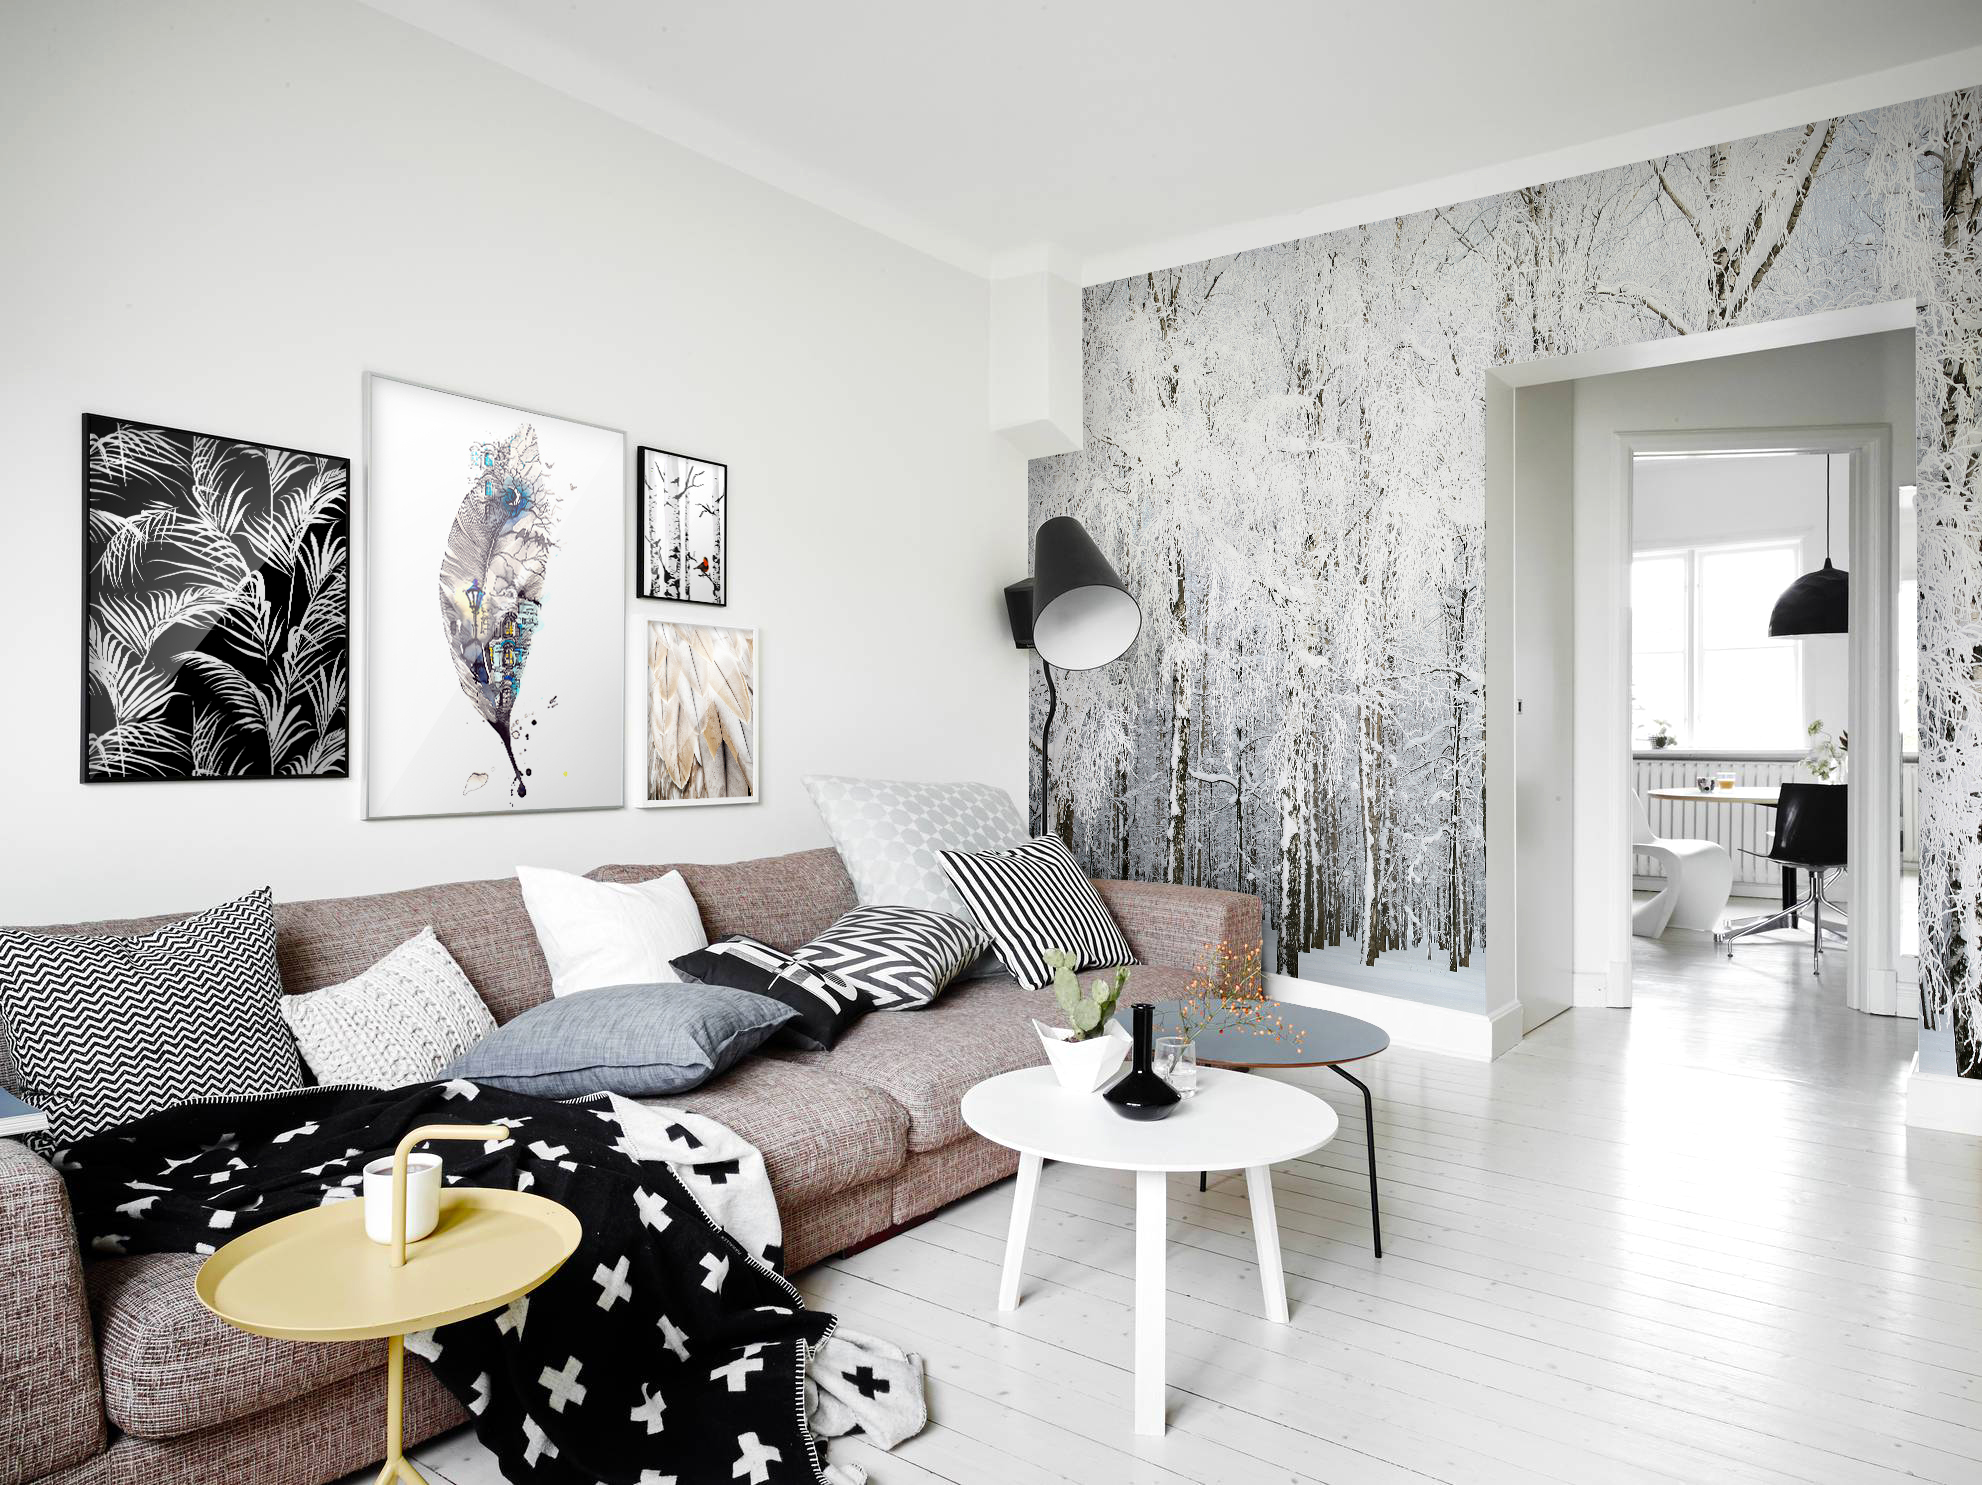 Cold nature • Scandinavian - Living room - Flowers and plants - Landscapes - Wall Murals - Posters